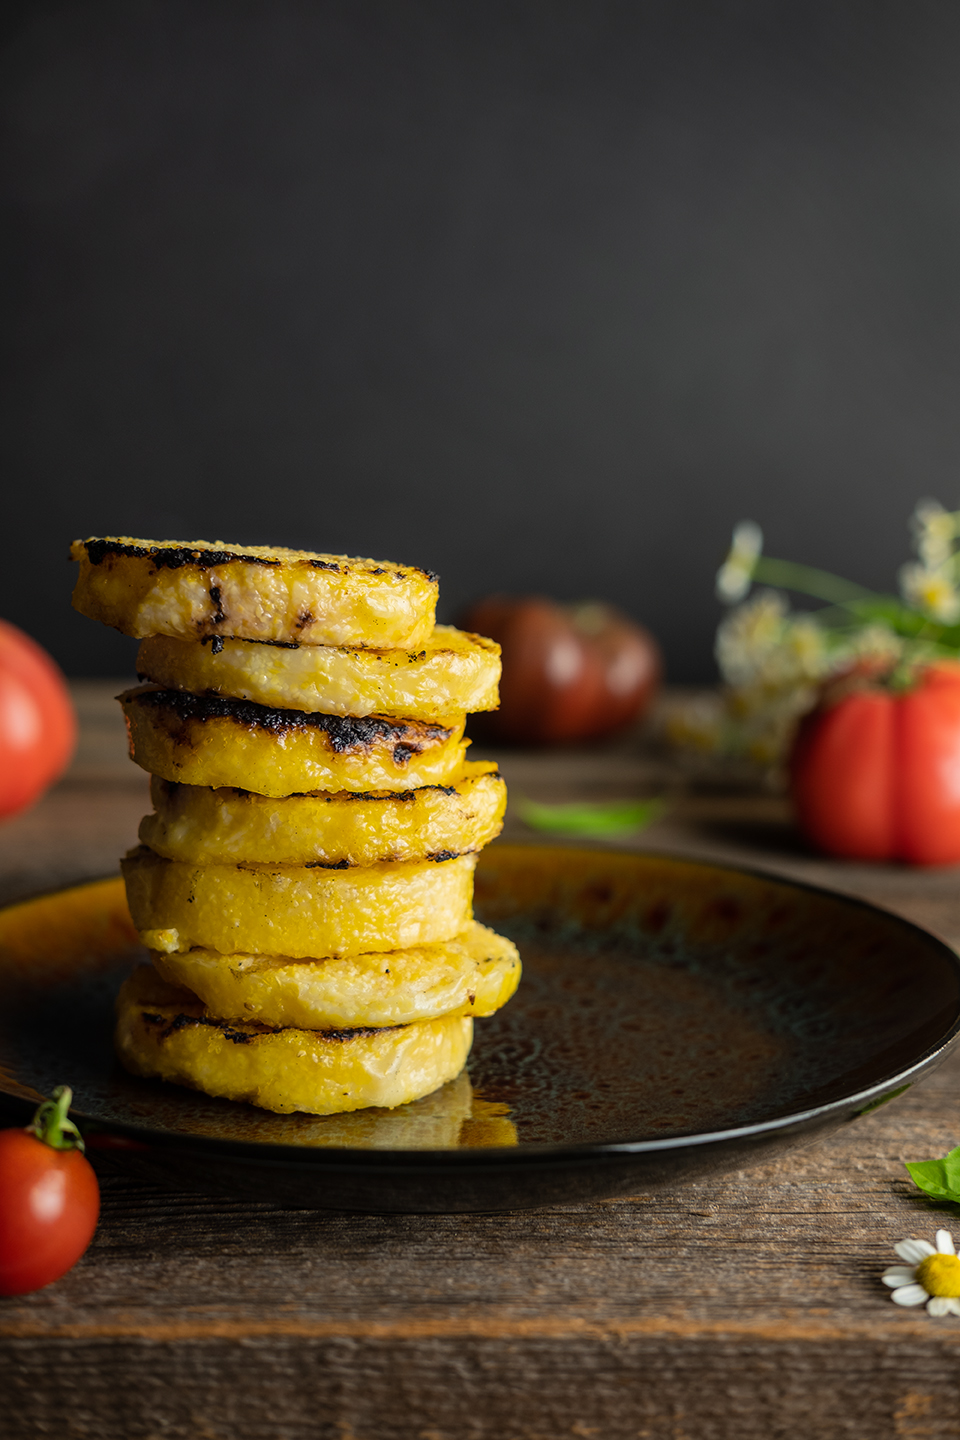  Grilled polenta on a wooden background stacked with tomatoes and basil. 